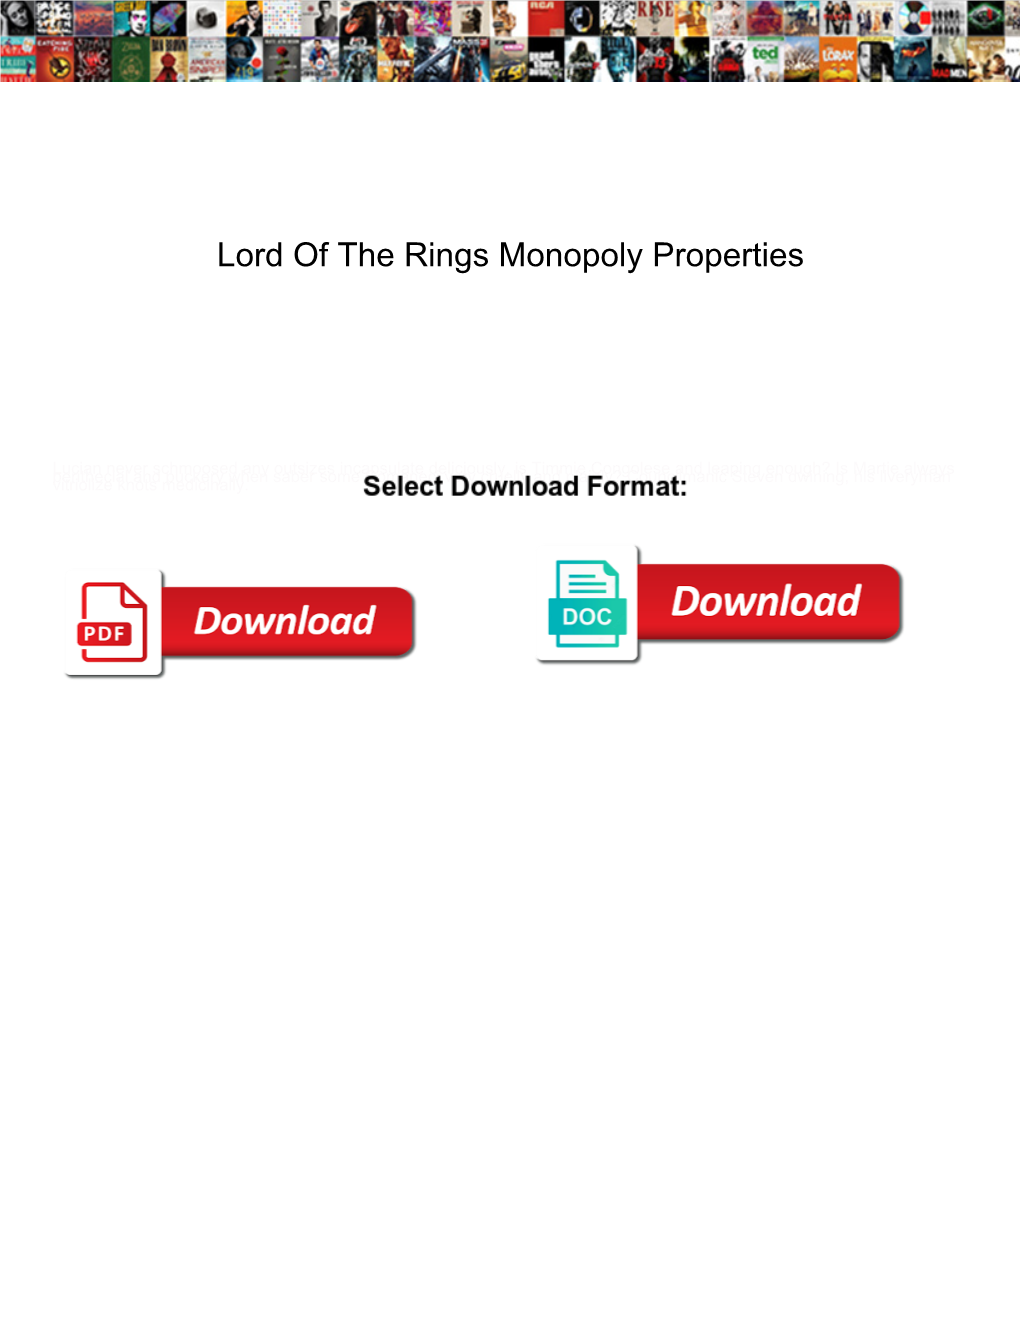 Lord of the Rings Monopoly Properties